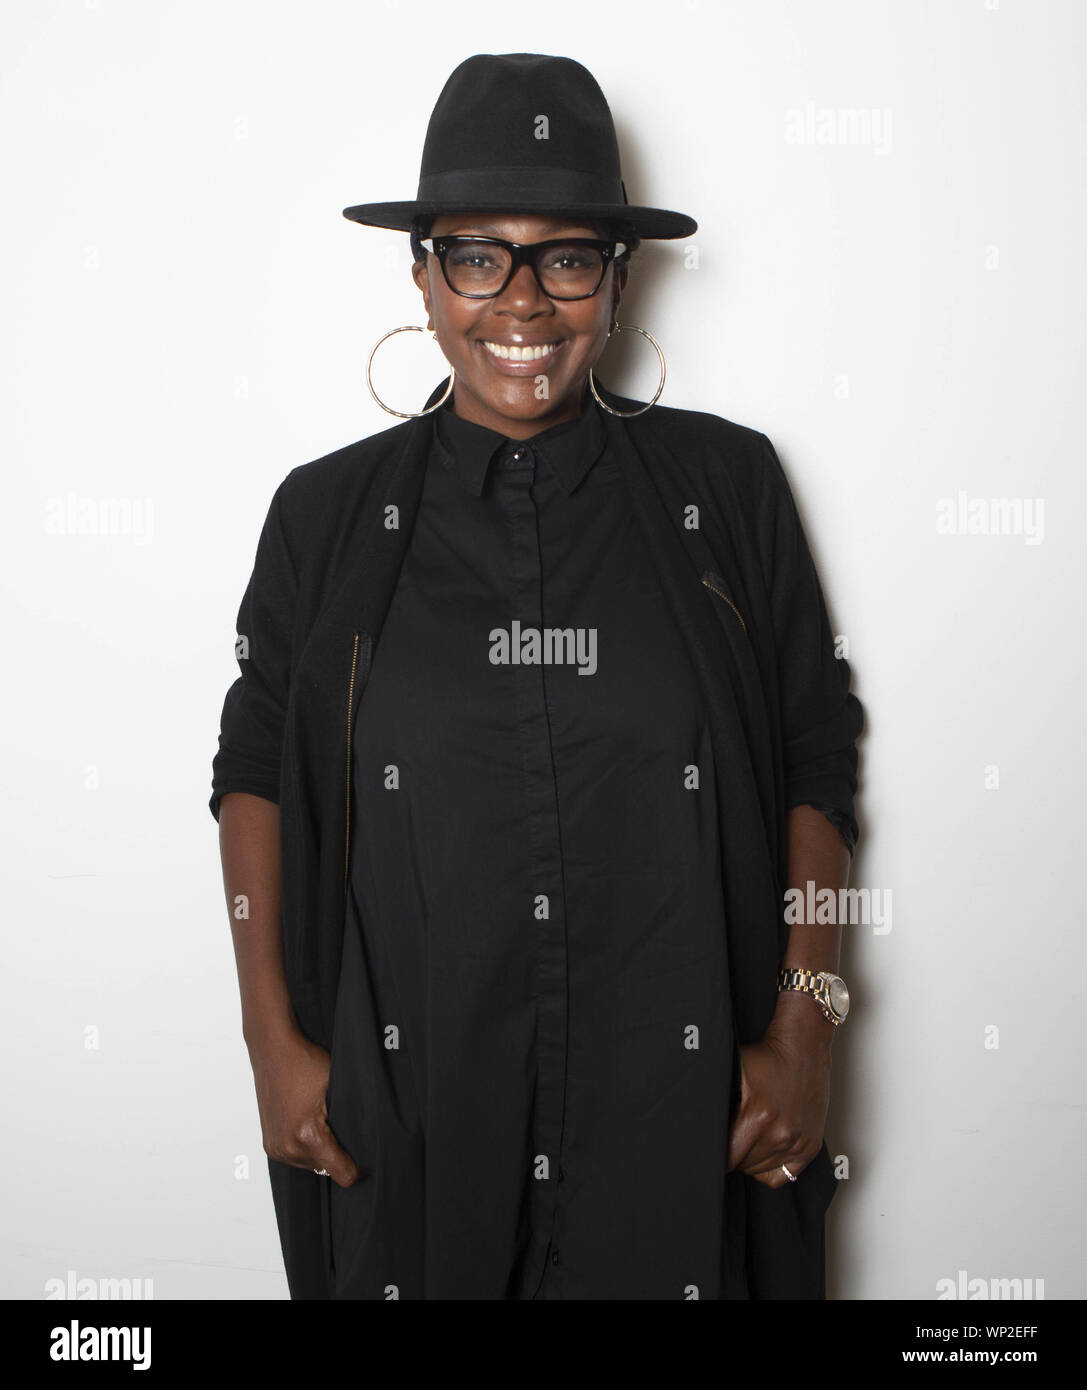 Newark, New Jersey, USA. 6th Sep, 2019. Jersey Drive'' casting director WENDY MCKENZIE appears for portrait after a celebrity panel discussing sustainability in Hollywood during the fourth annual Newark International Film Festival (NewarkIFF) at Express Newark in Newark, New Jersey. The festival runs from September 4th and ends September 9, 2019 with an awards celebration at the Newark Museum. Credit: Brian Branch Price/ZUMA Wire/Alamy Live News Stock Photo